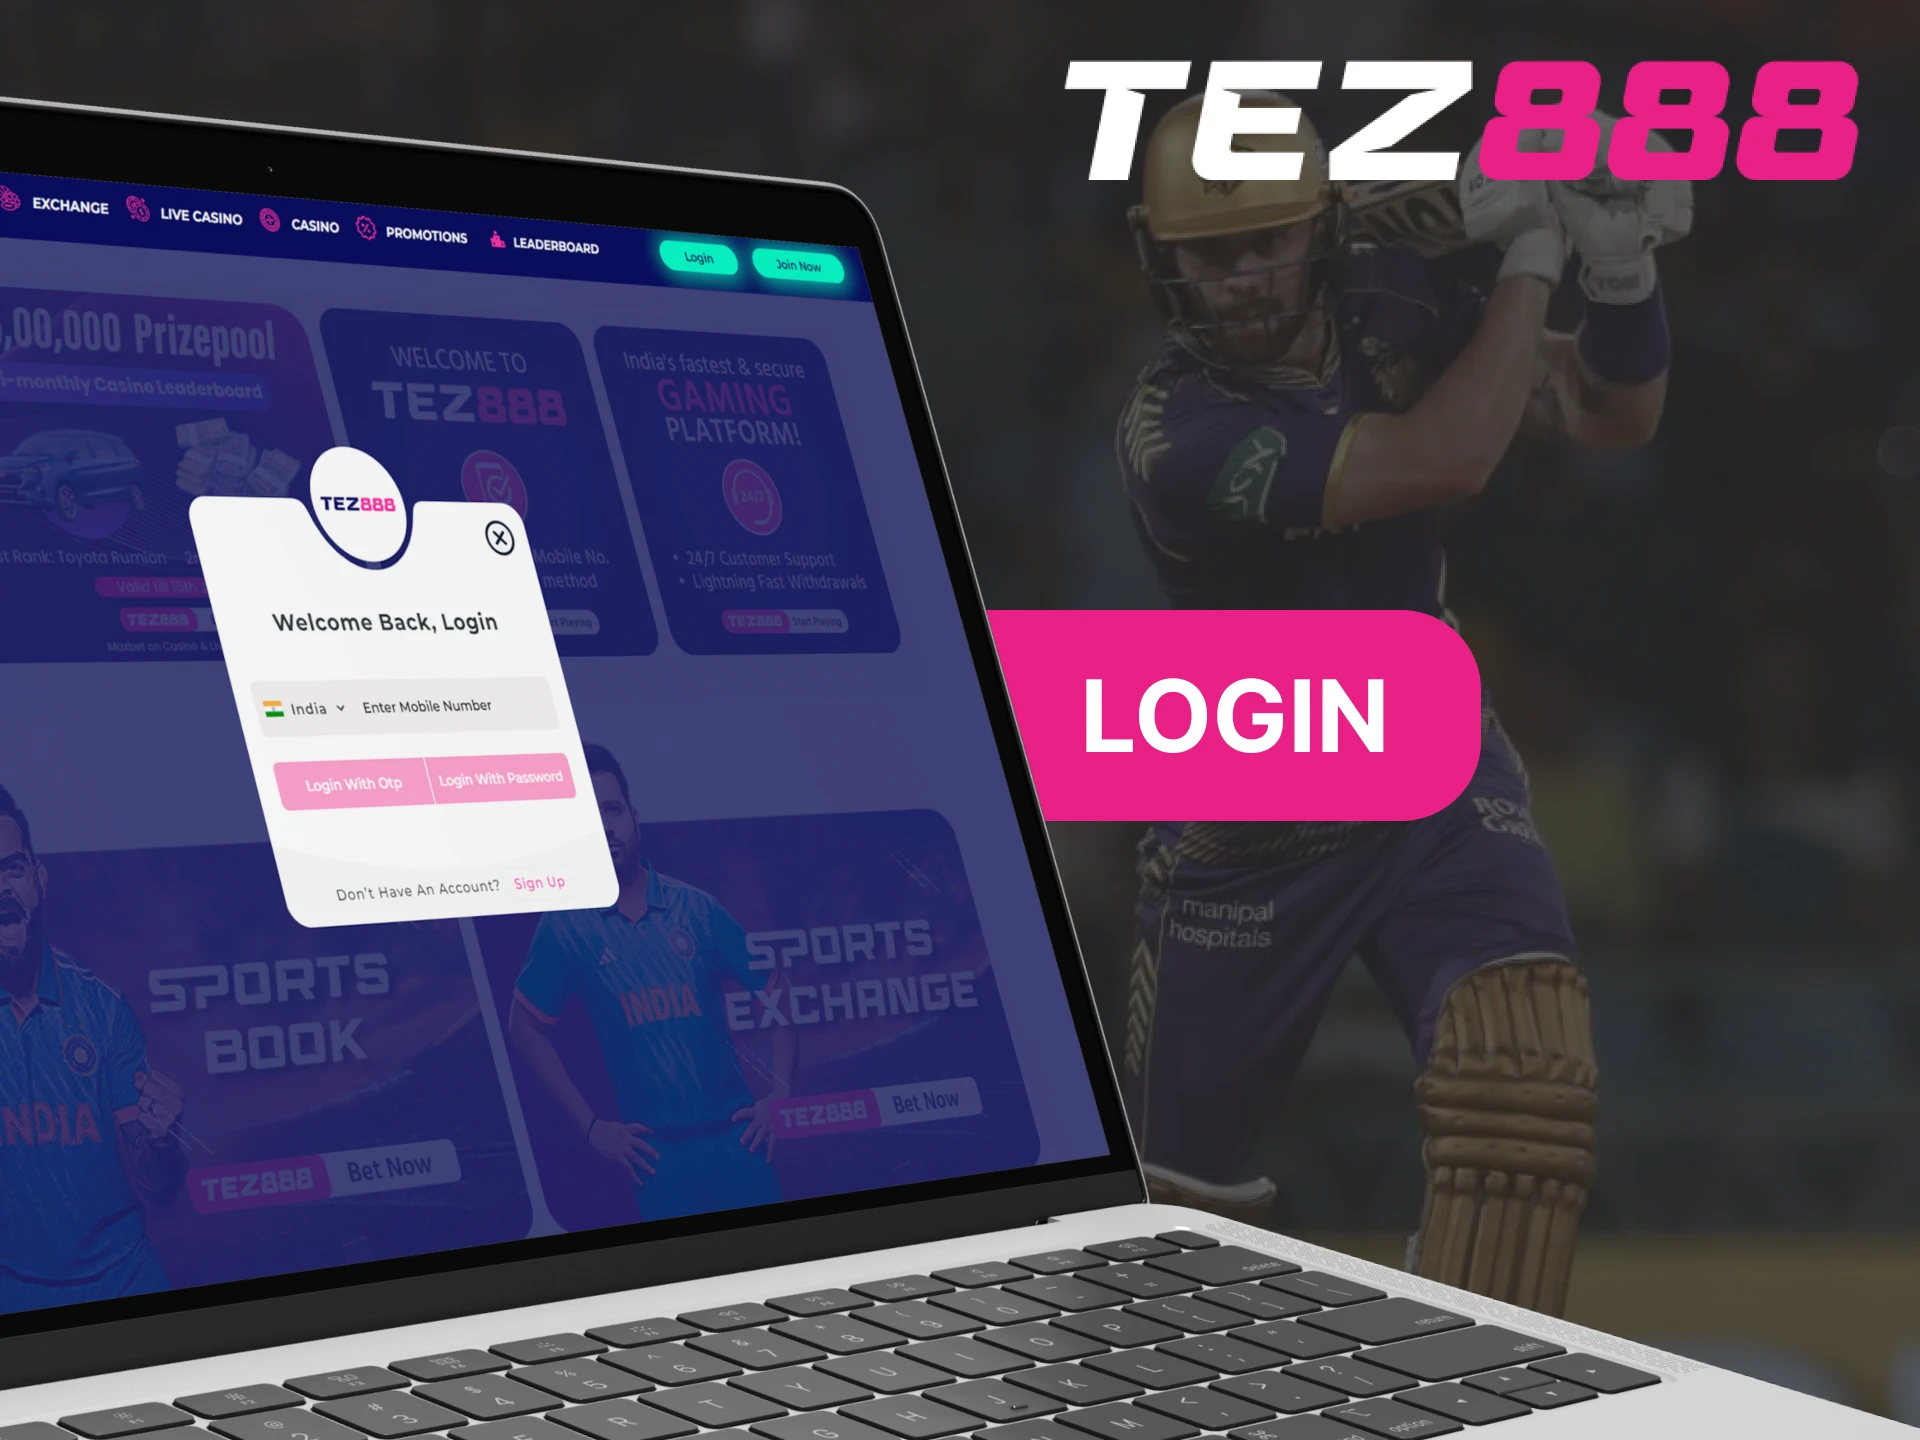 Log in to Tez888 using your login and password.